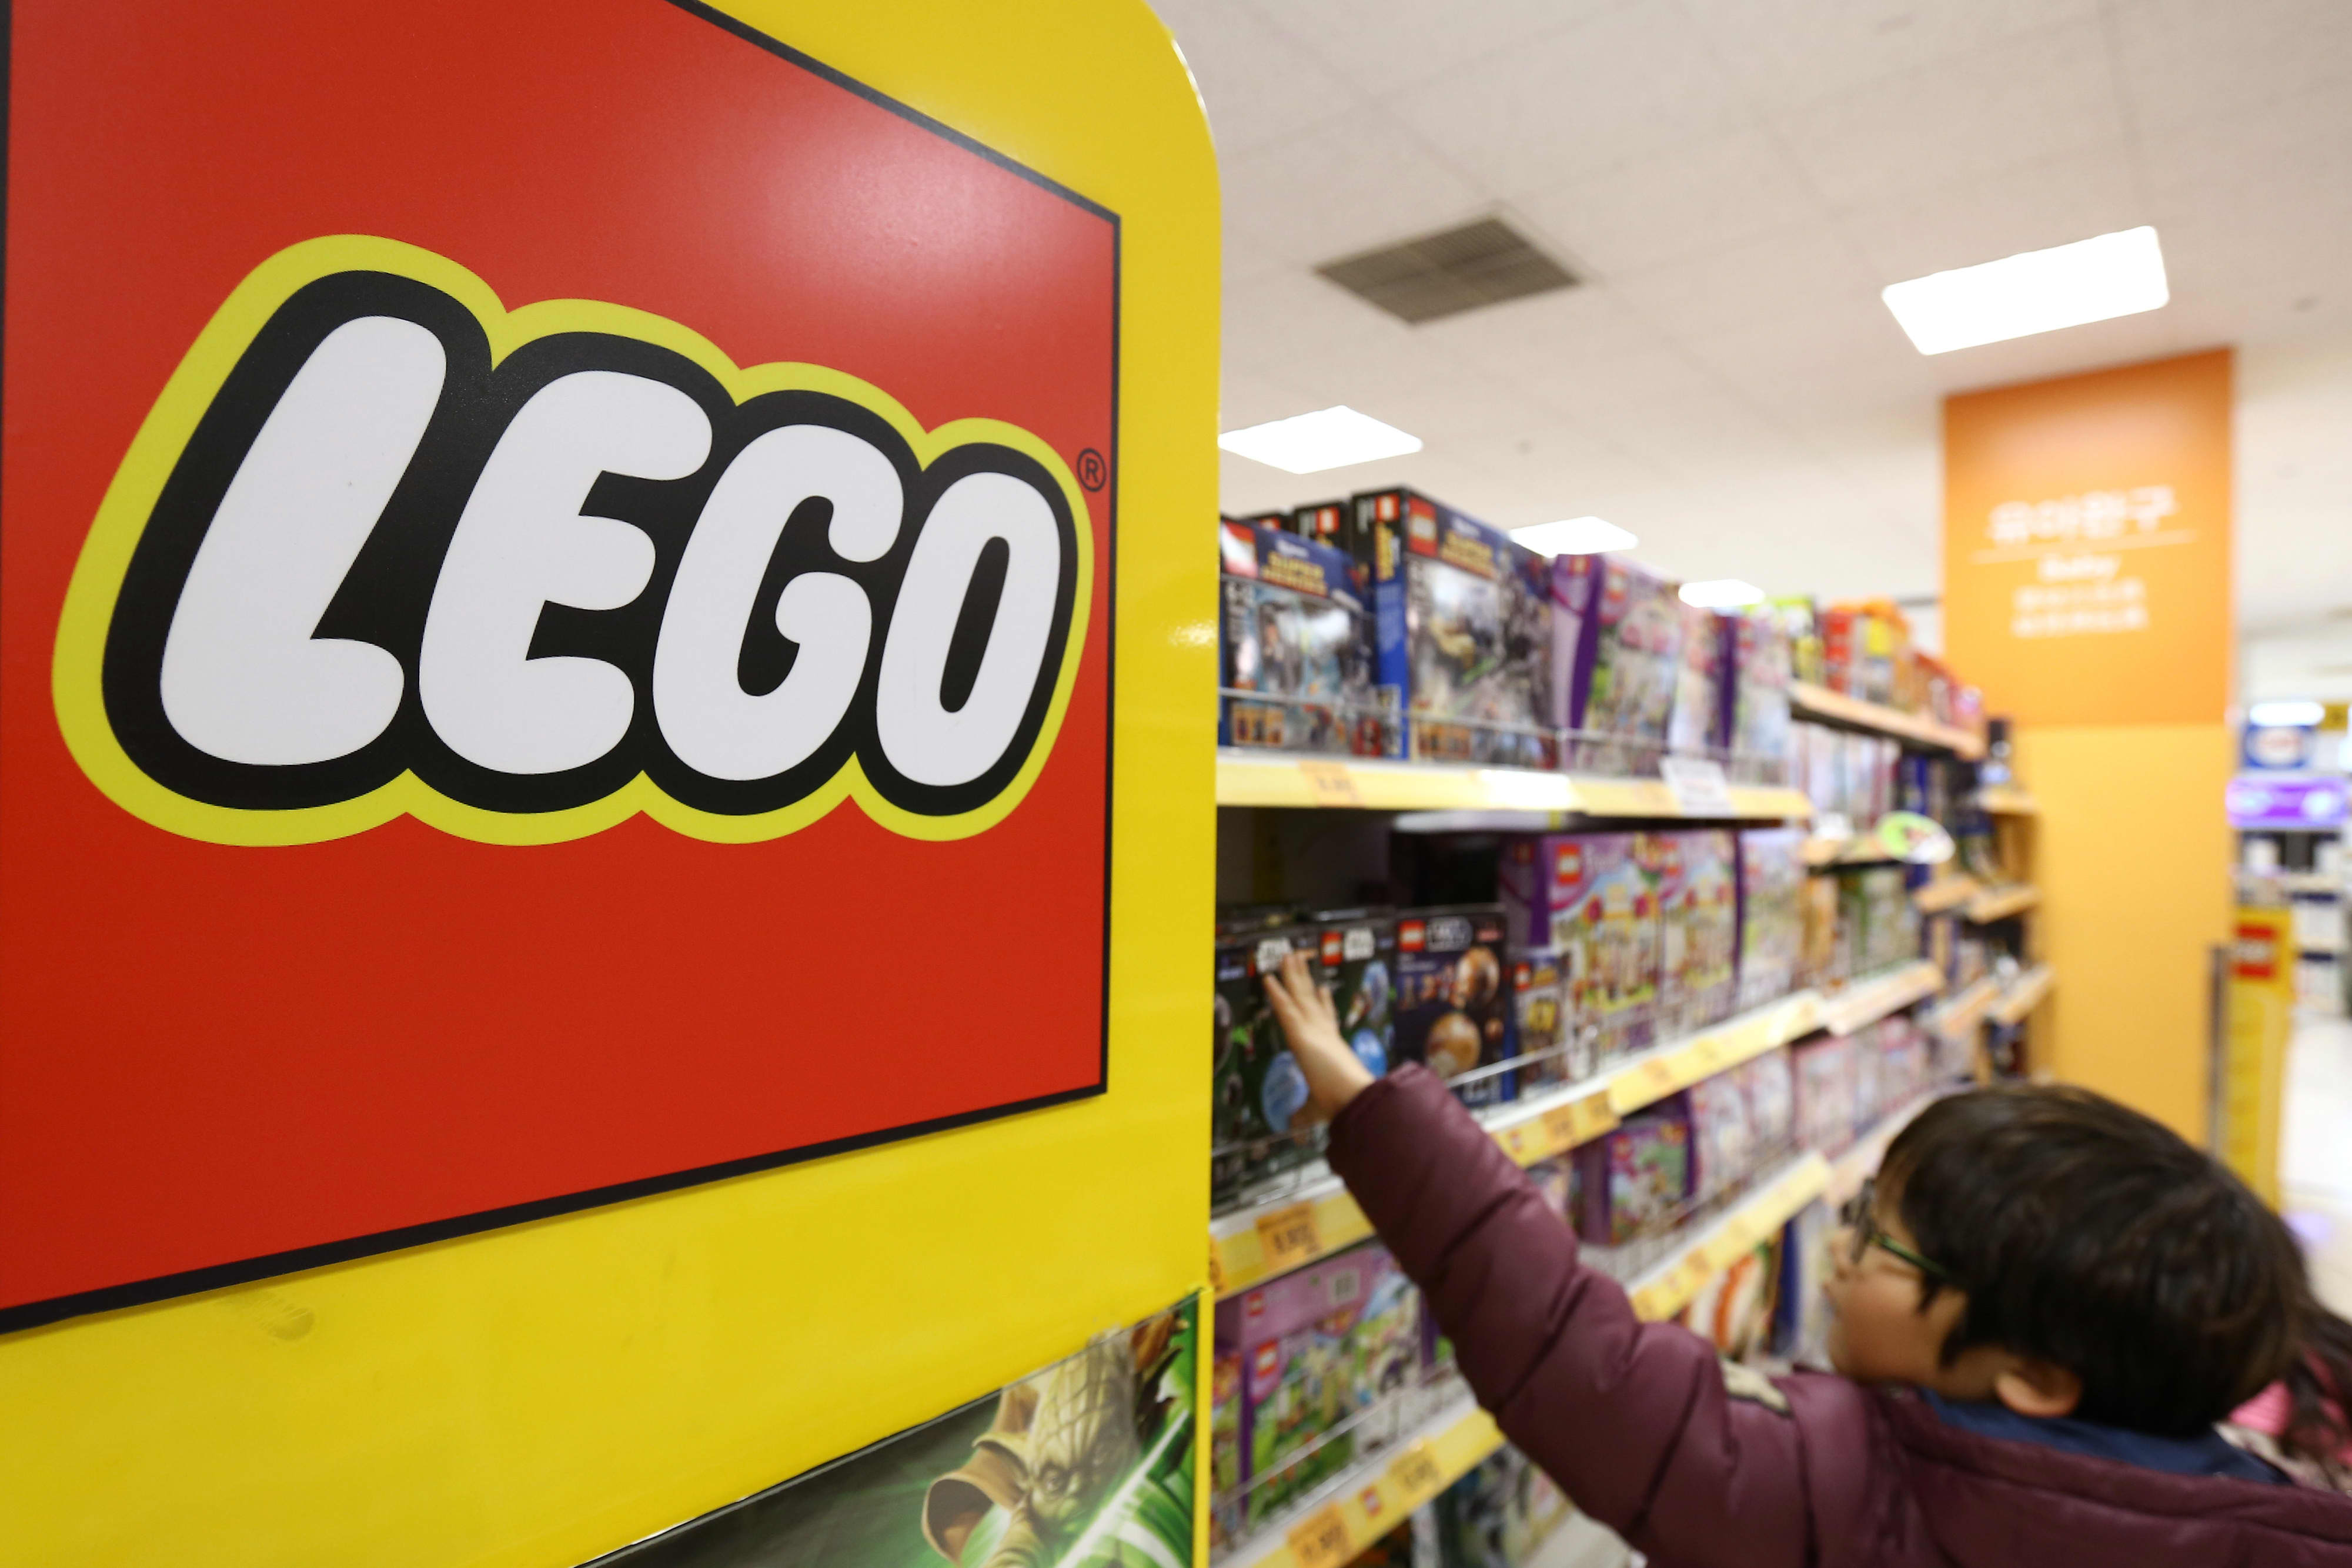 Lego sales soared in 2020, helped by e-commerce and China’s growth